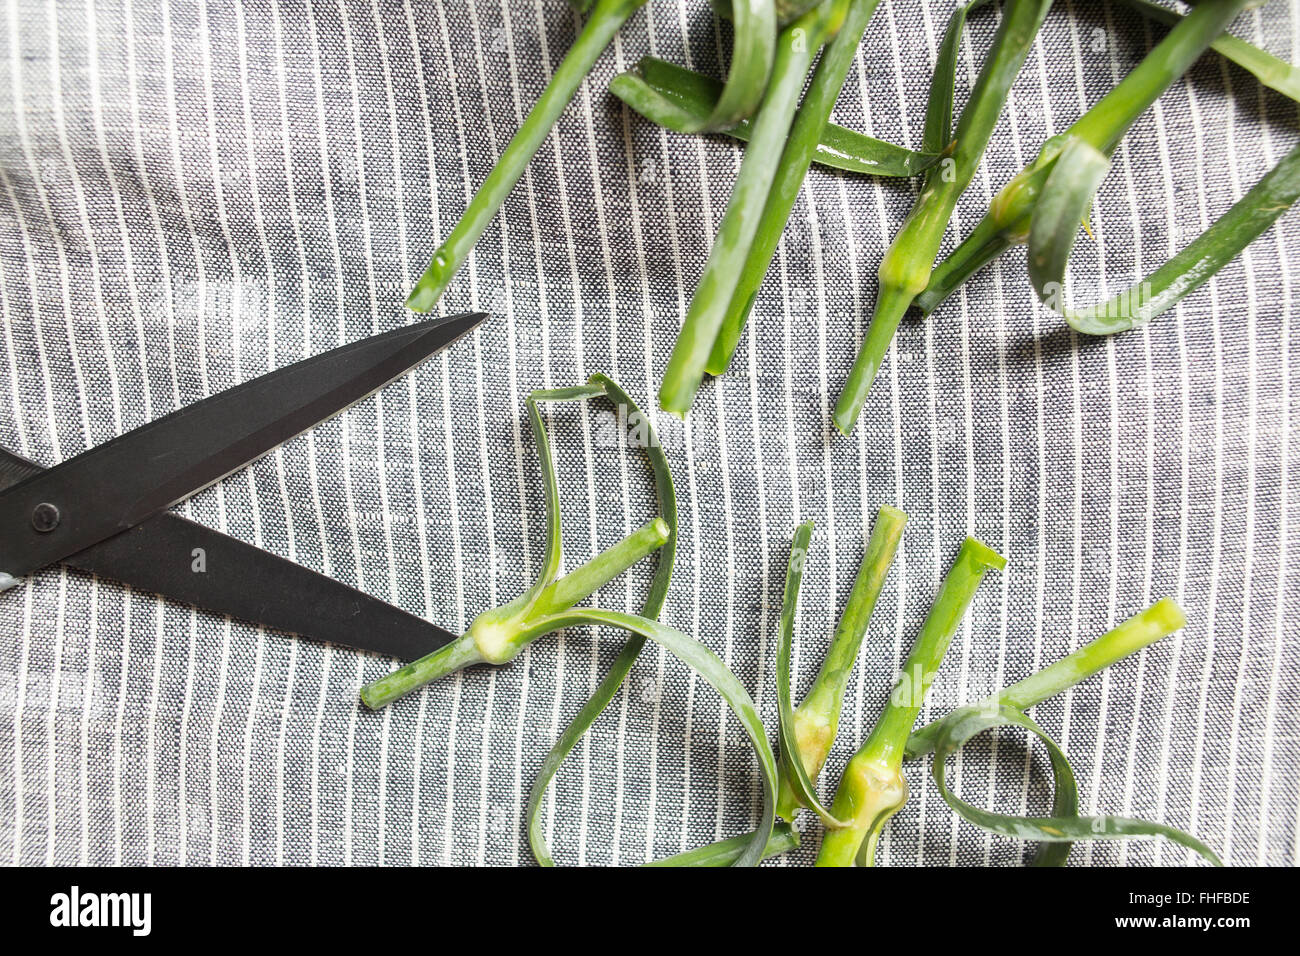 Scissors and cutted stems Stock Photo